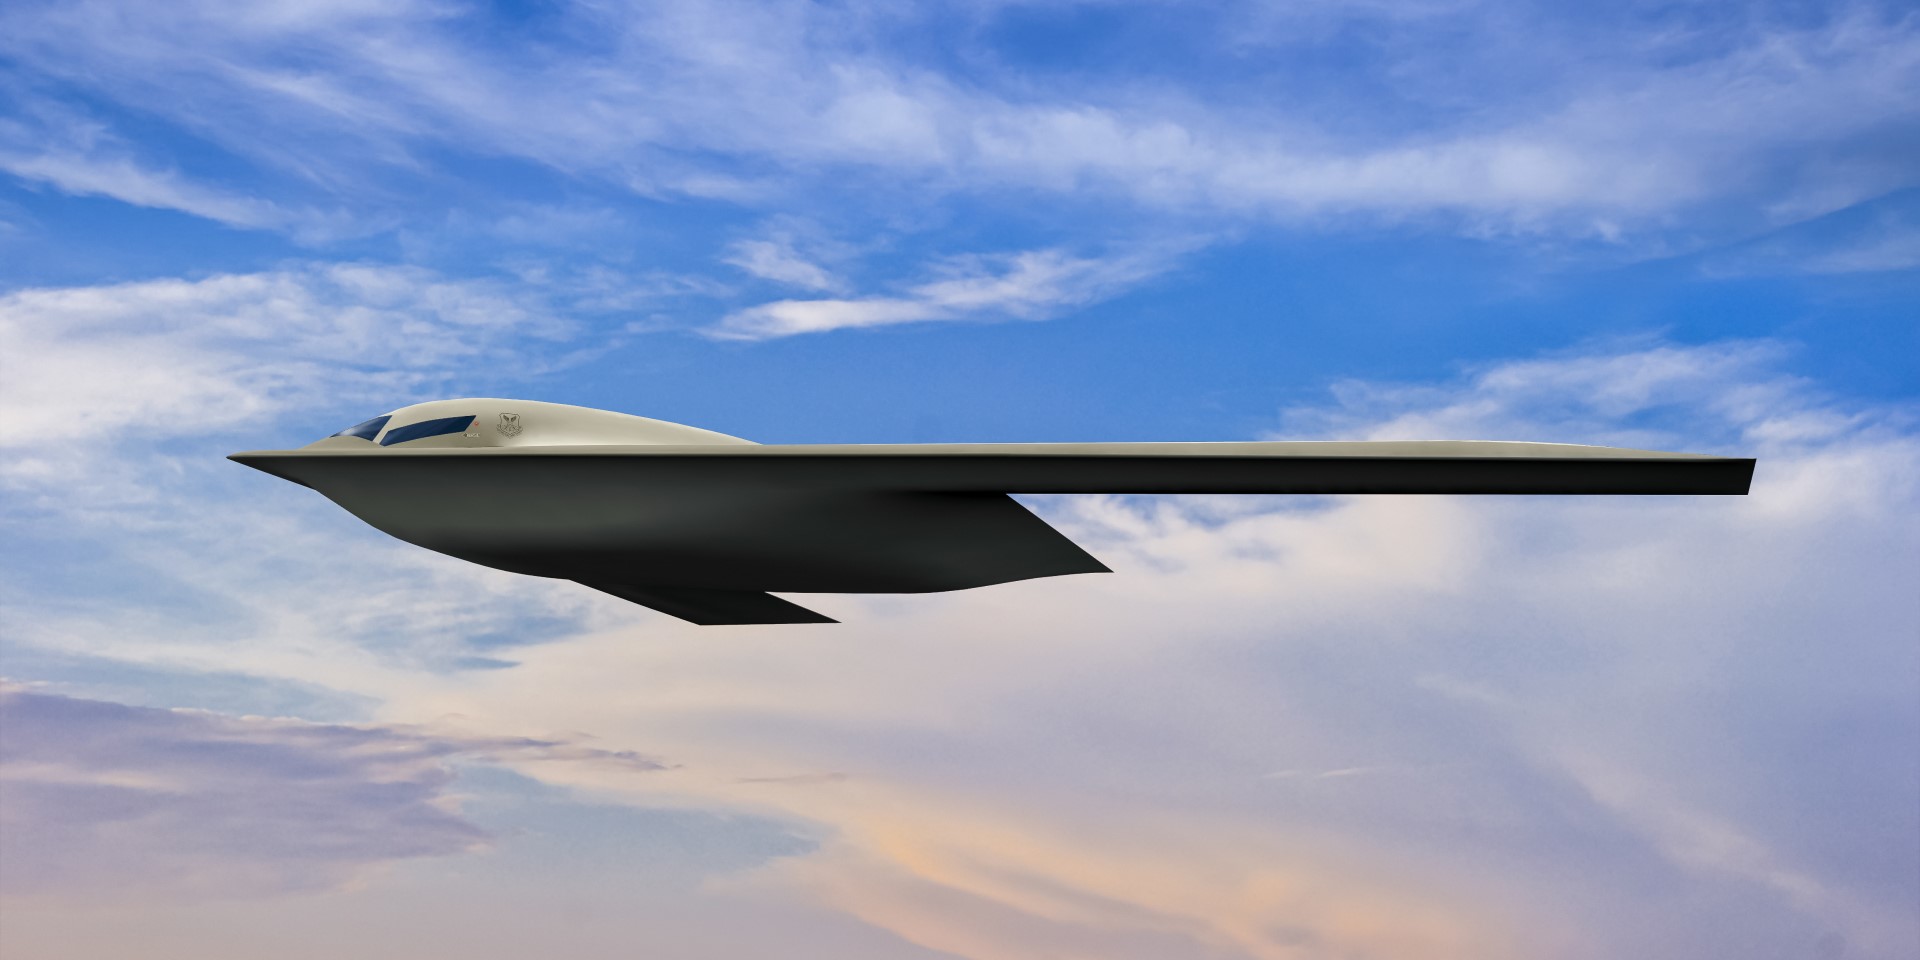 USAF releases new image of secretive B-21 stealth bomber - Aerospace